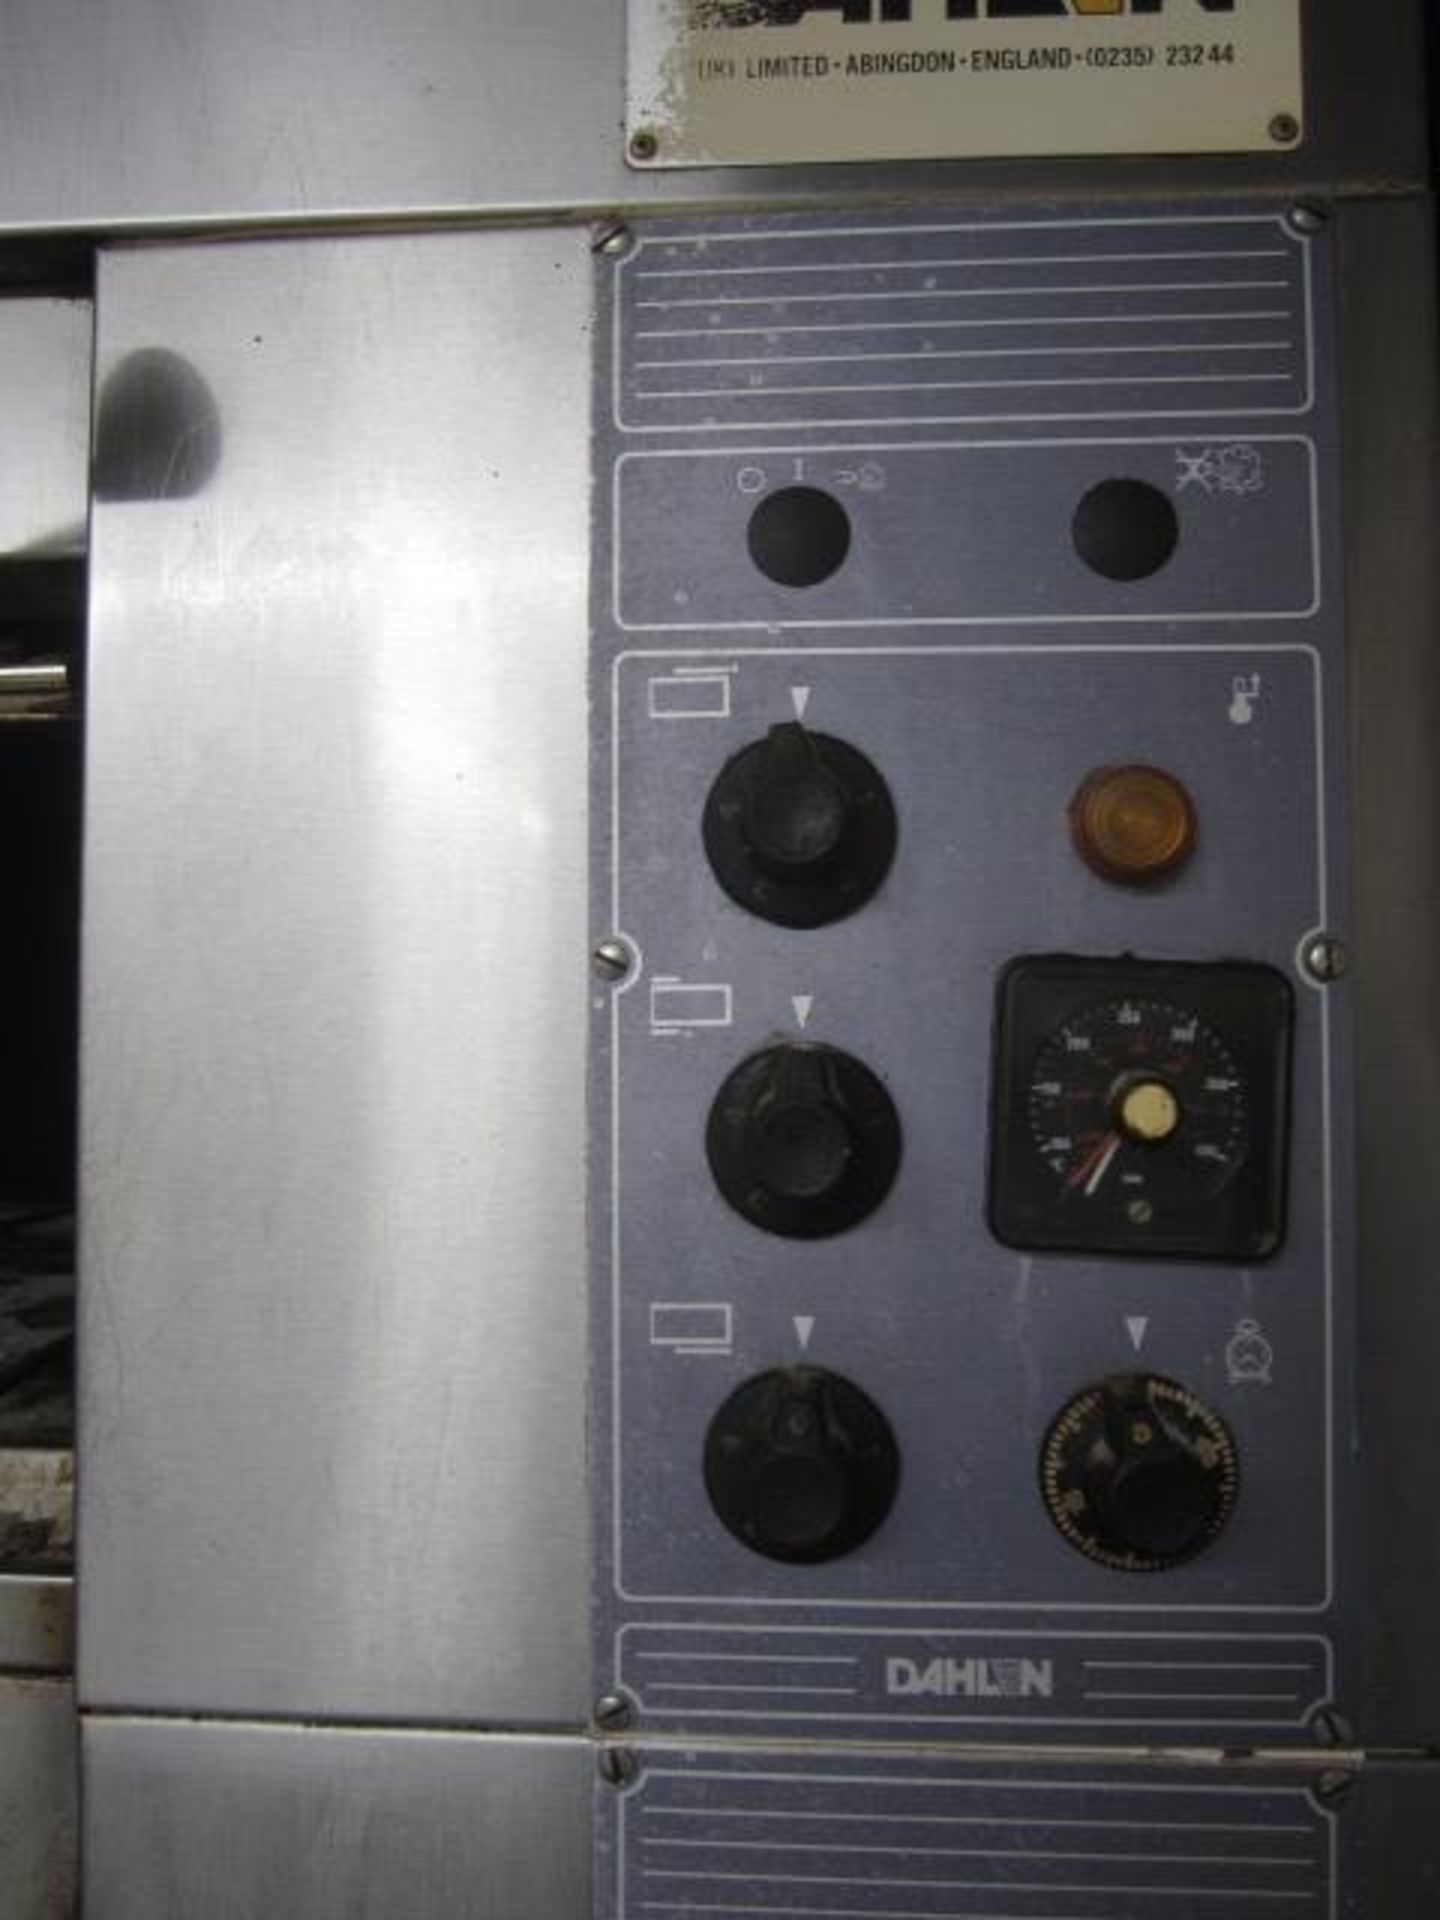 Dahlen stainless steel commercial 4 deck oven, 56" deck width, approx. overall size: 1950mm x 2010mm - Image 5 of 7